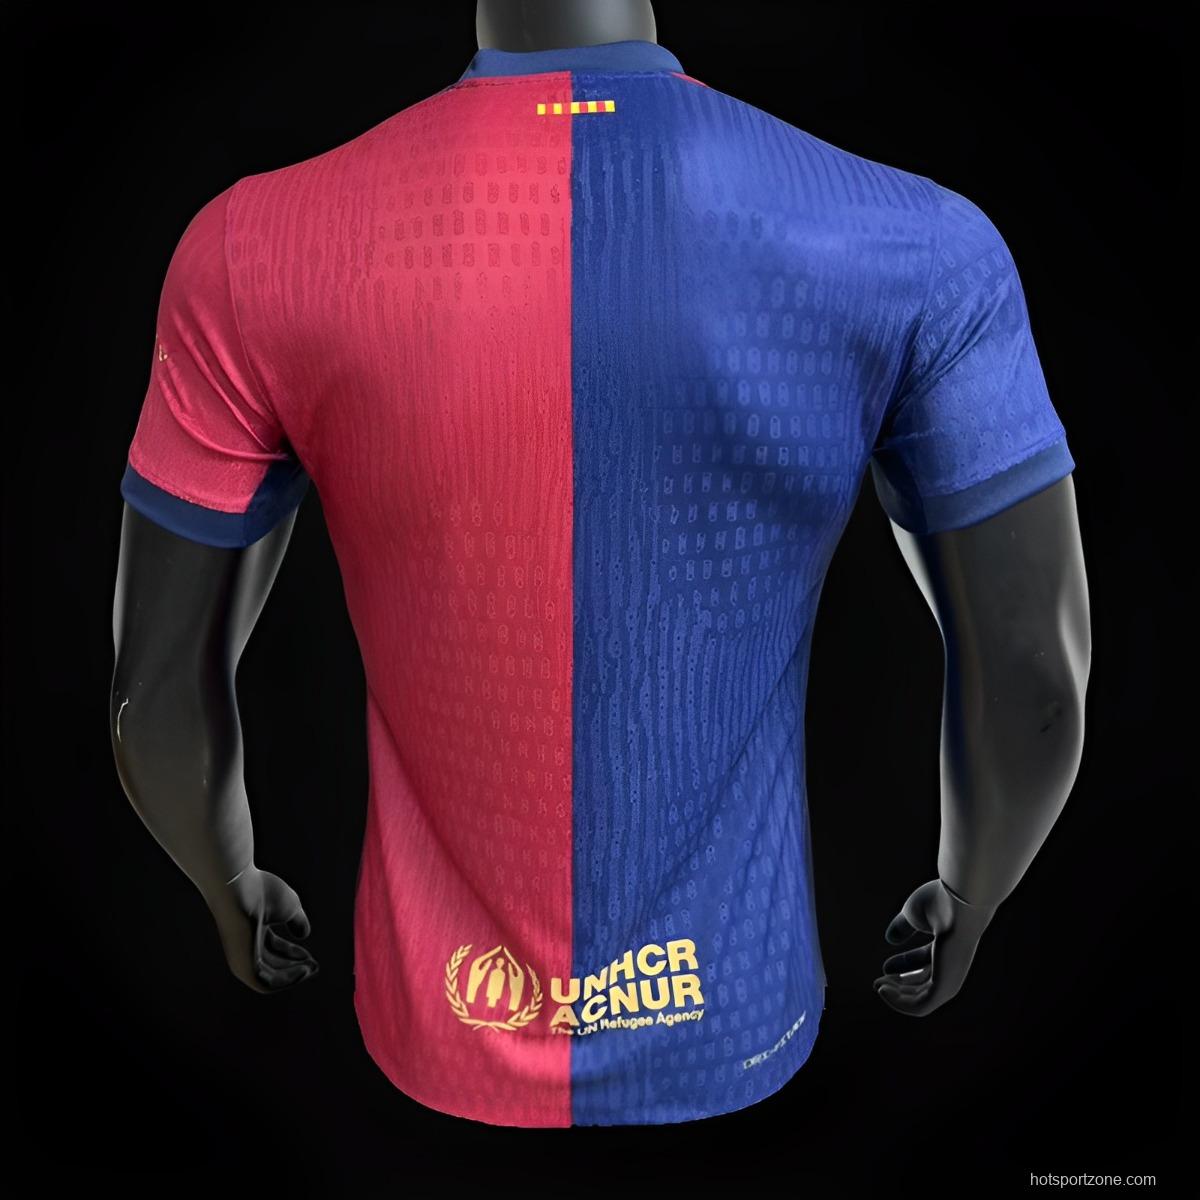 Player Version 24/25 Barcelona Home Jersey